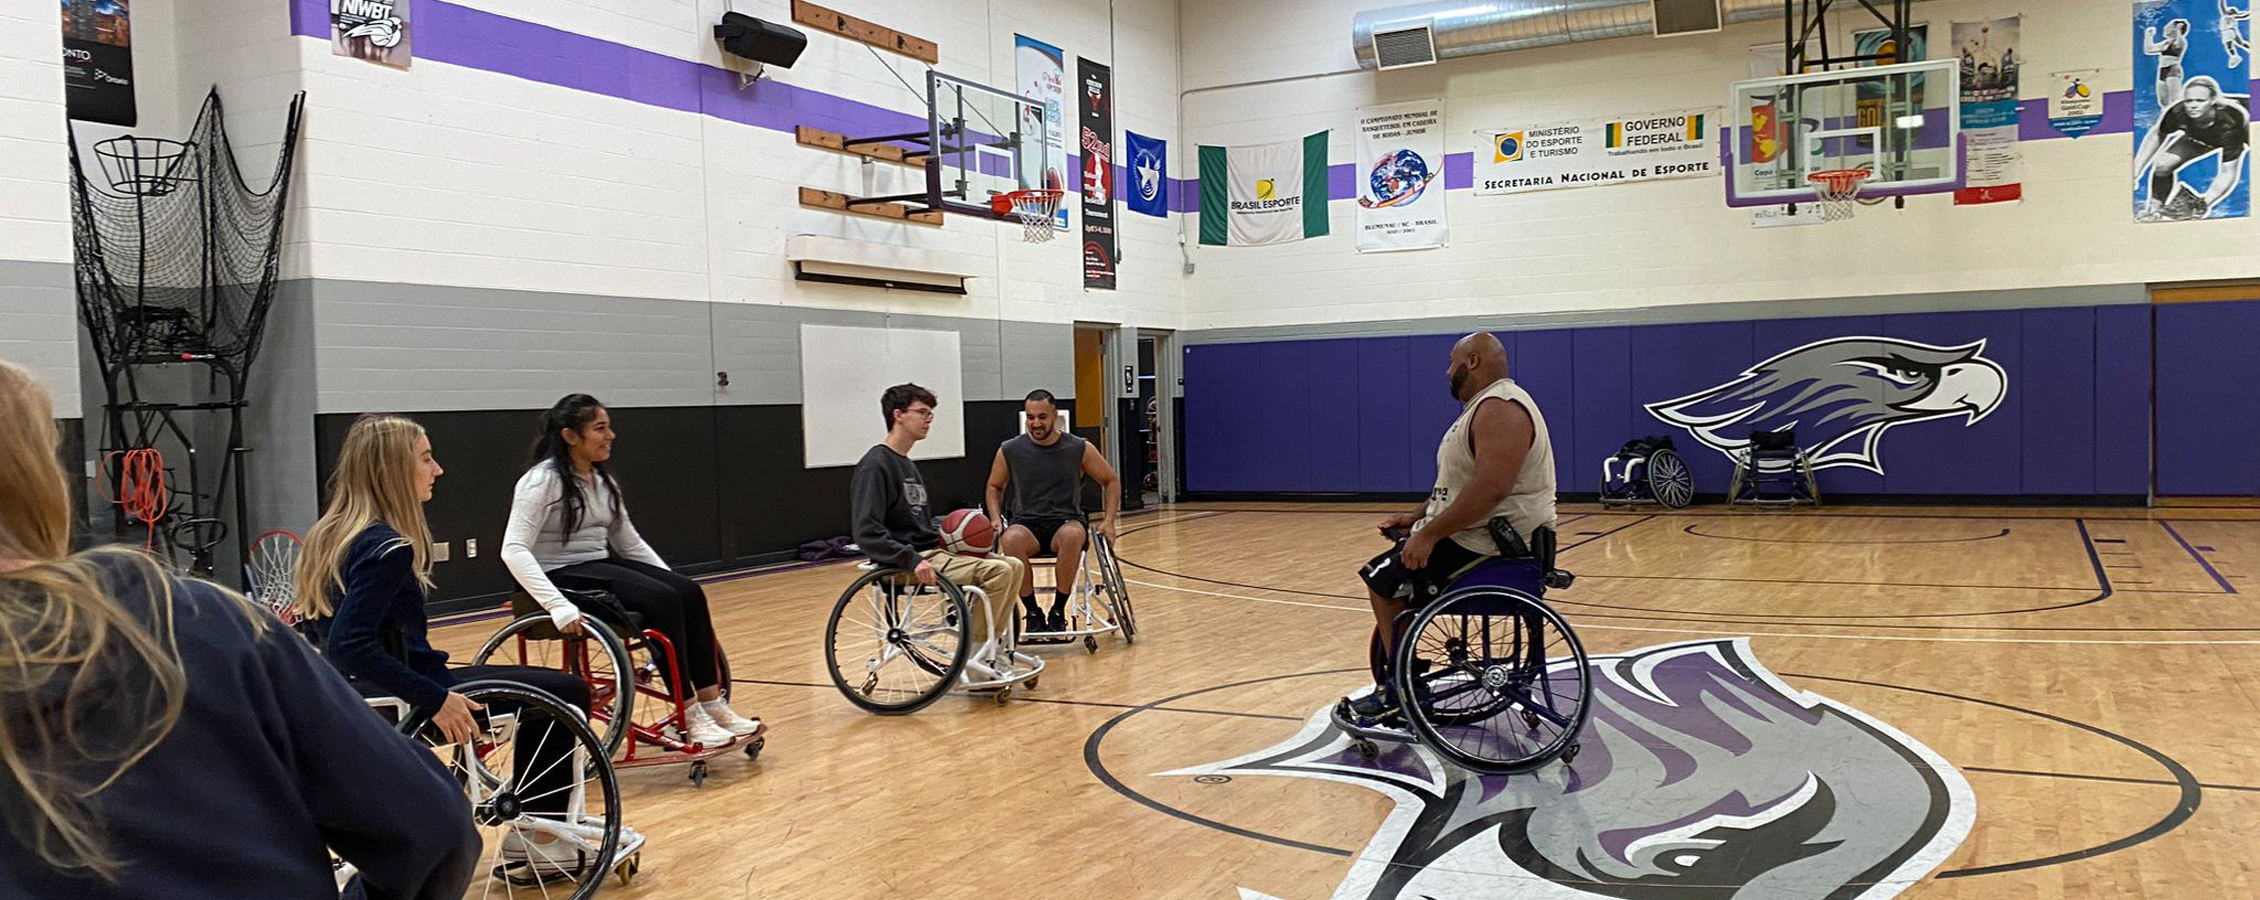 An international student from Sweden coaches wheelchair basketball in a gym.